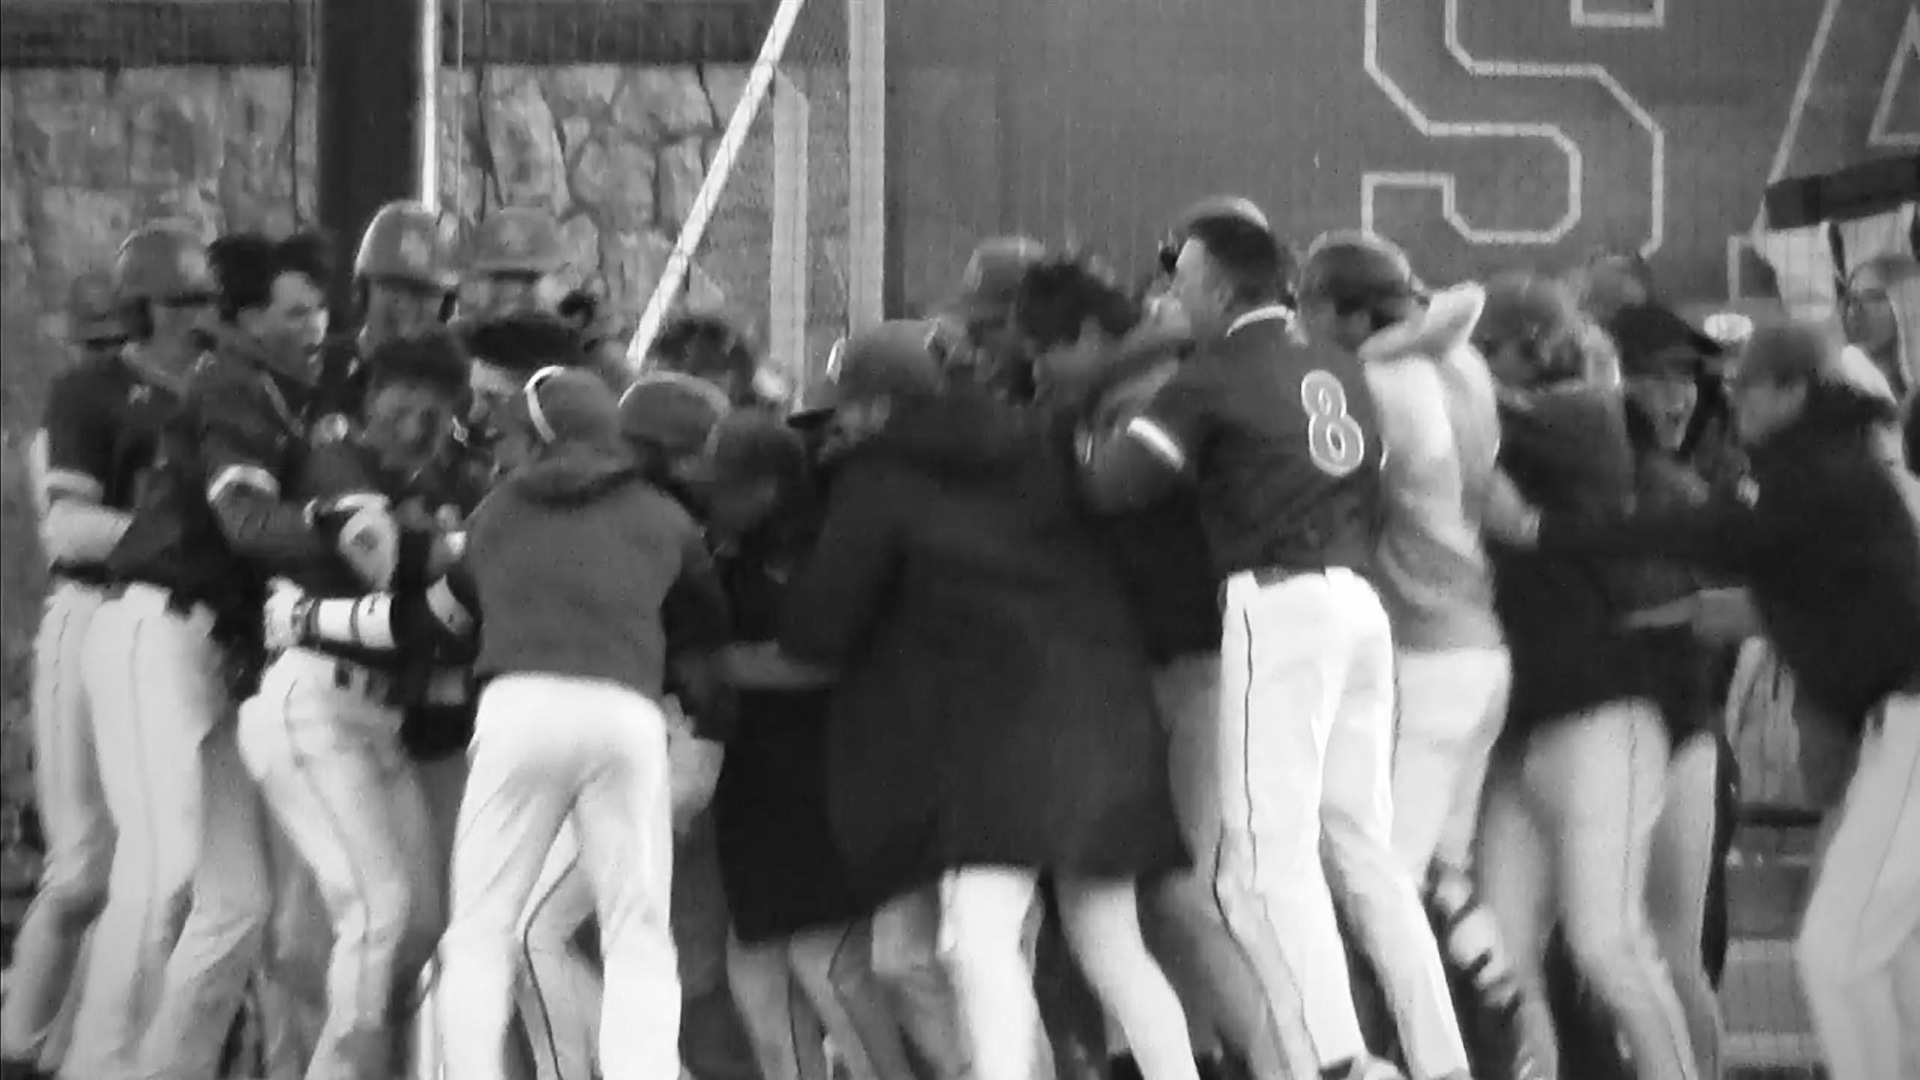 Matt D'Amato mobbed by his Seahawk teammates at the plate after swatting a three-run walk-off home run against the Wildcats on Tuesday evening at Reynolds Field. (Screenshot from live stream)